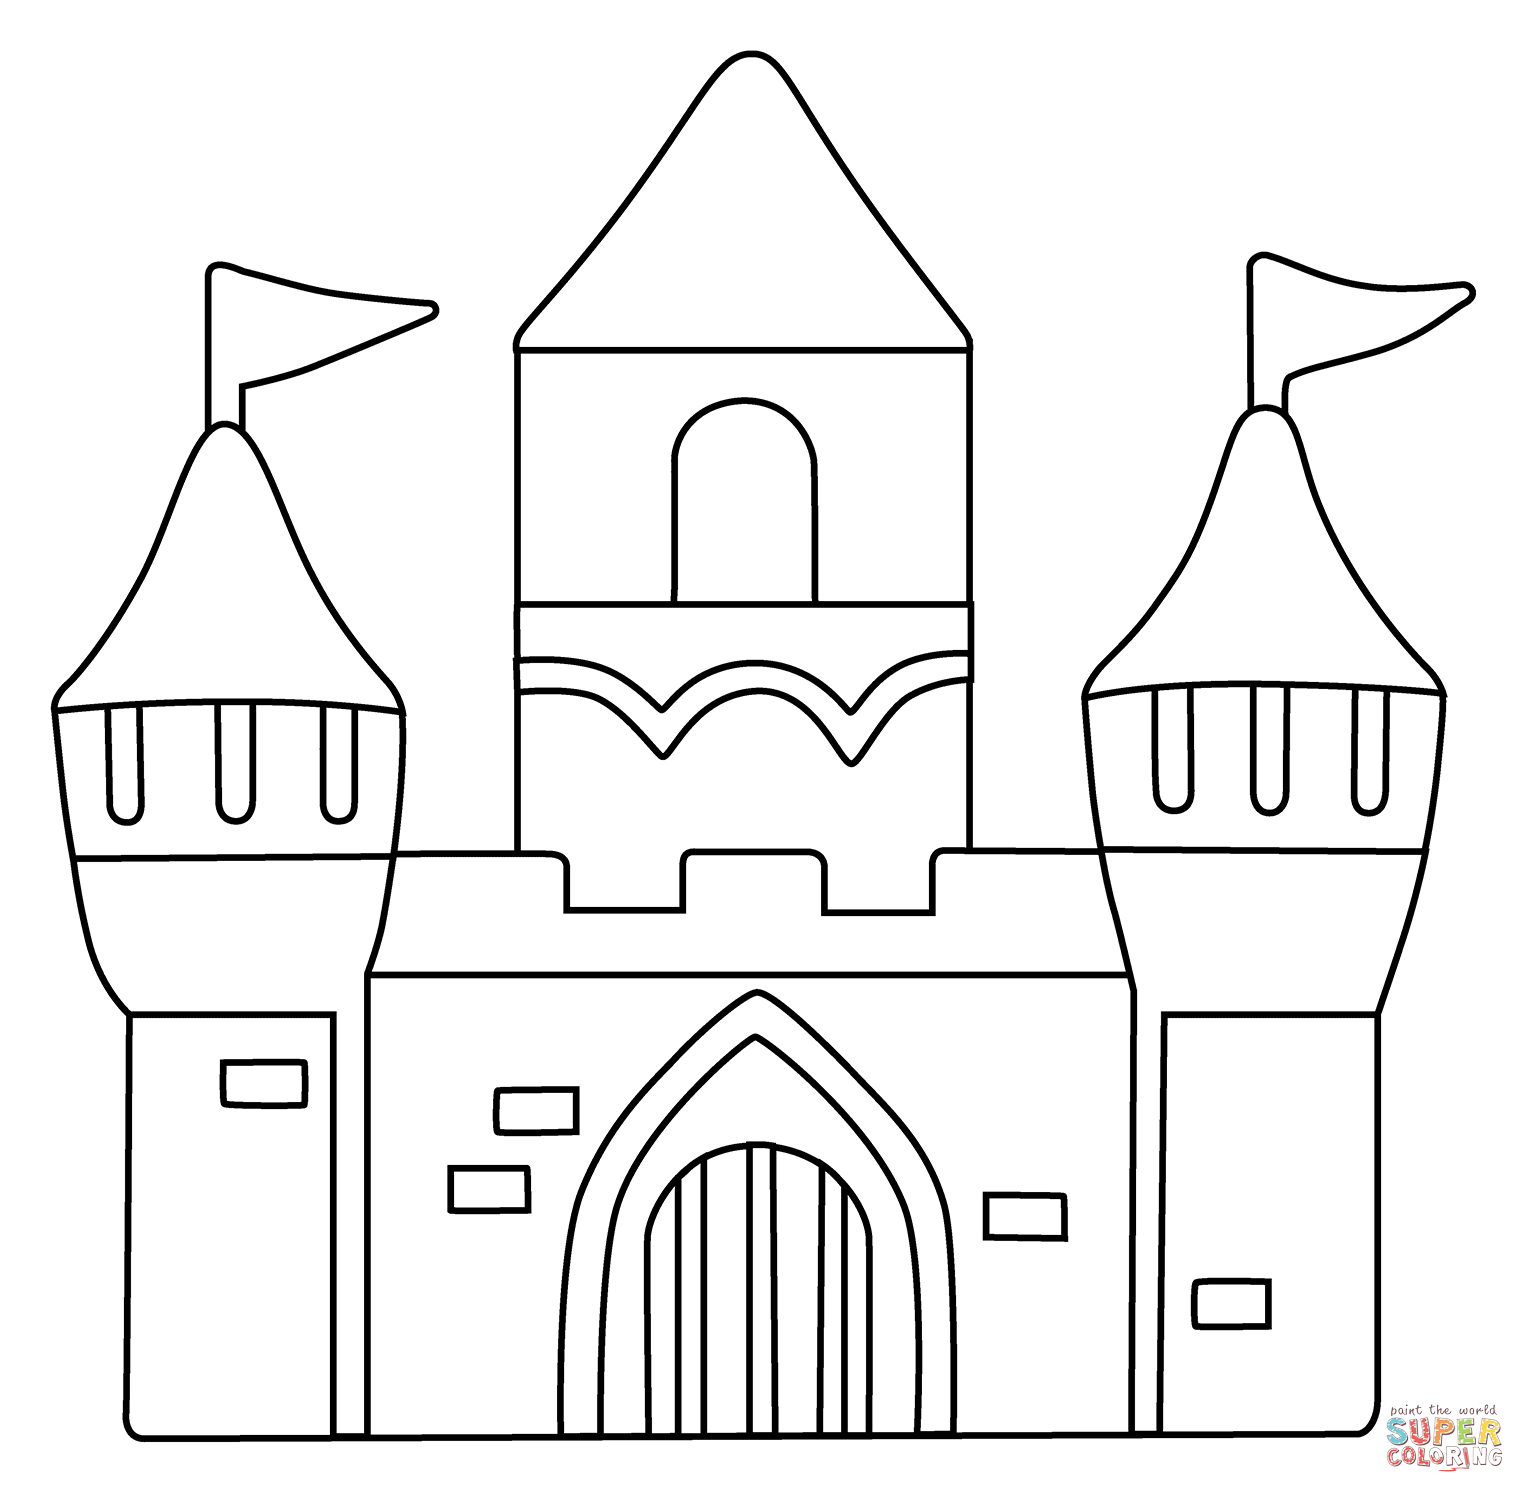 Castle emoji coloring page free printable coloring pages